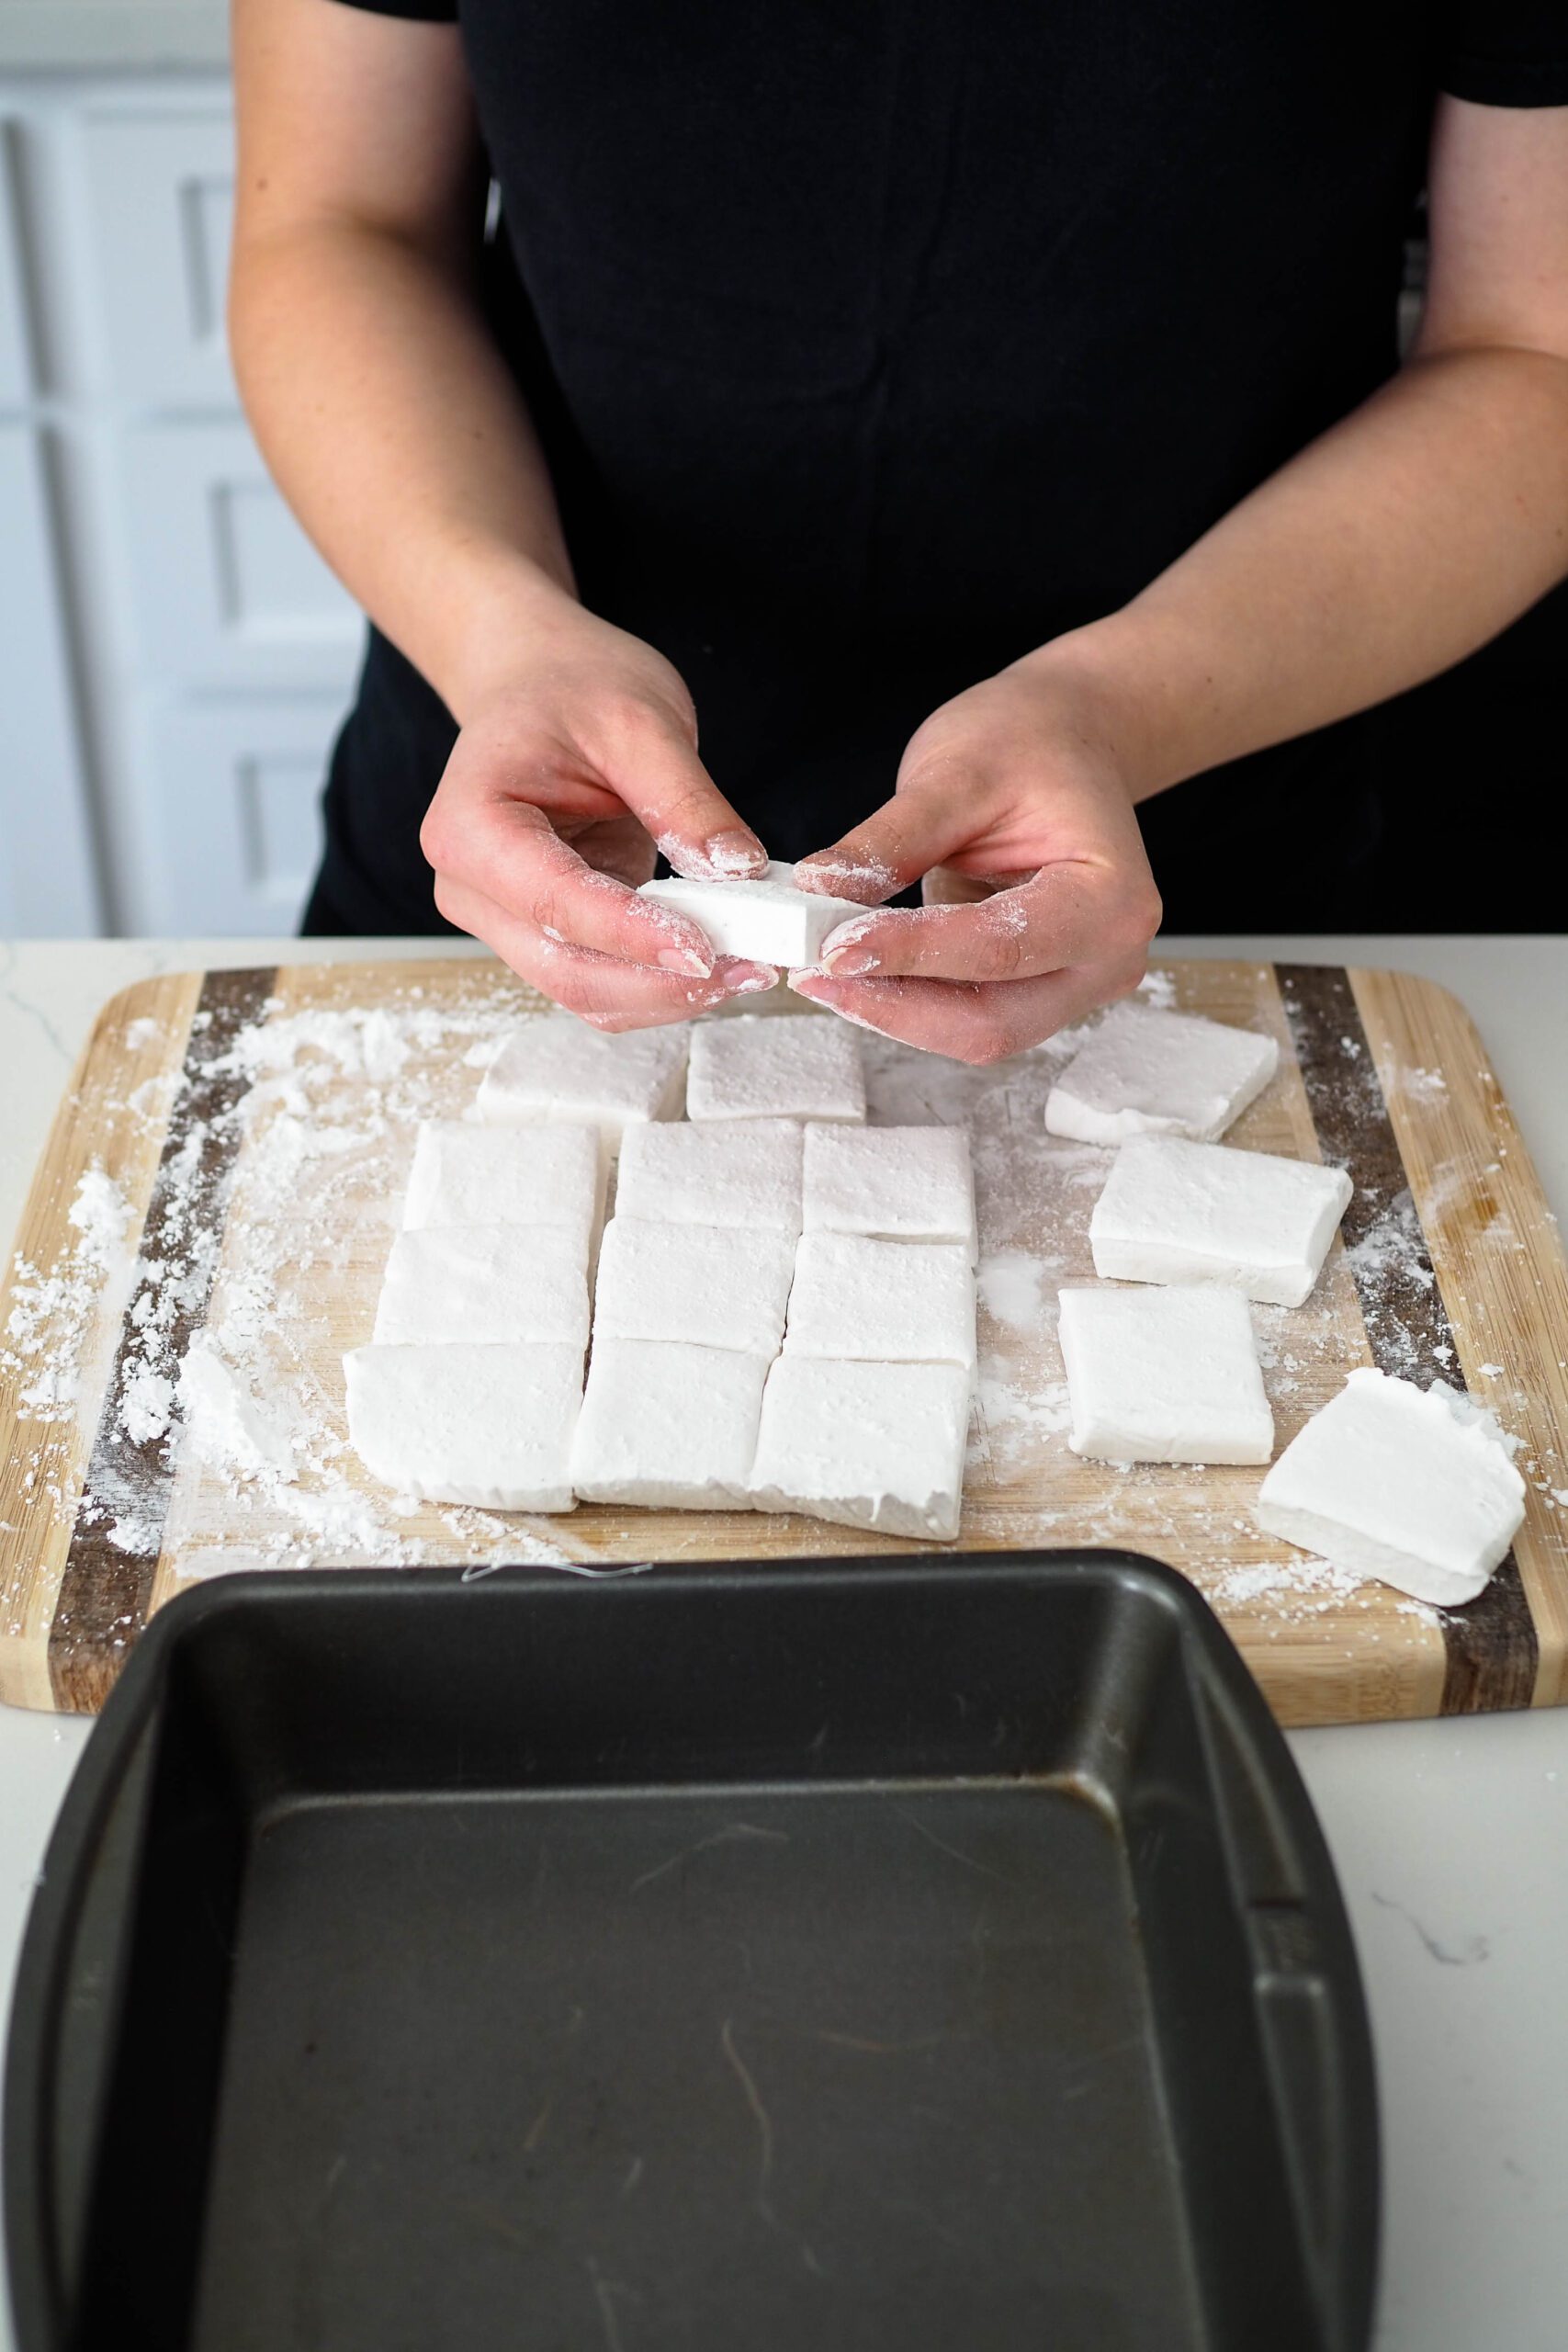 Two hands dust each side of the freshly cut marshmallow with powdered sugar.